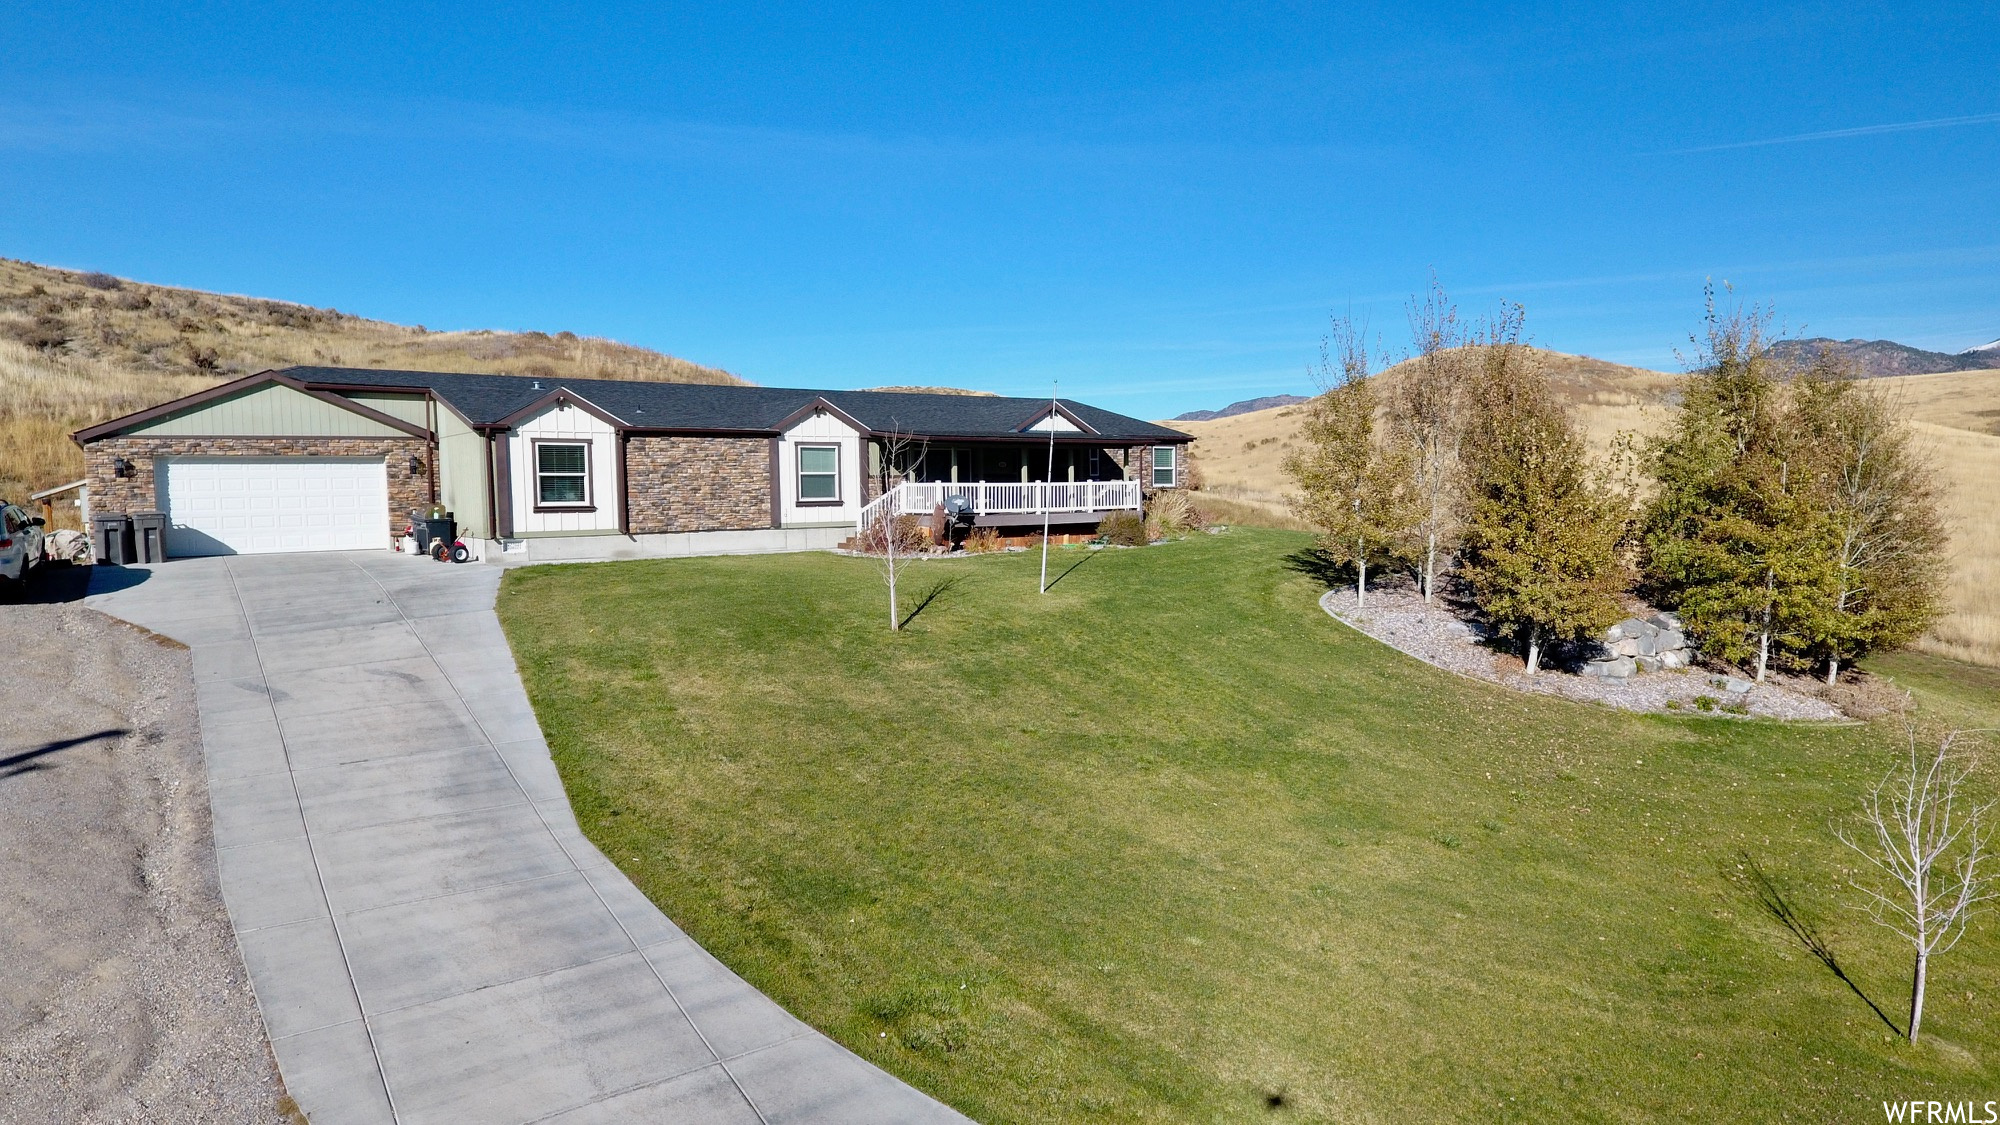 1449 E HIGHWAY 36, Malad City, Idaho 83252, 5 Bedrooms Bedrooms, 17 Rooms Rooms,3 BathroomsBathrooms,Residential,For sale,HIGHWAY 36,1965855